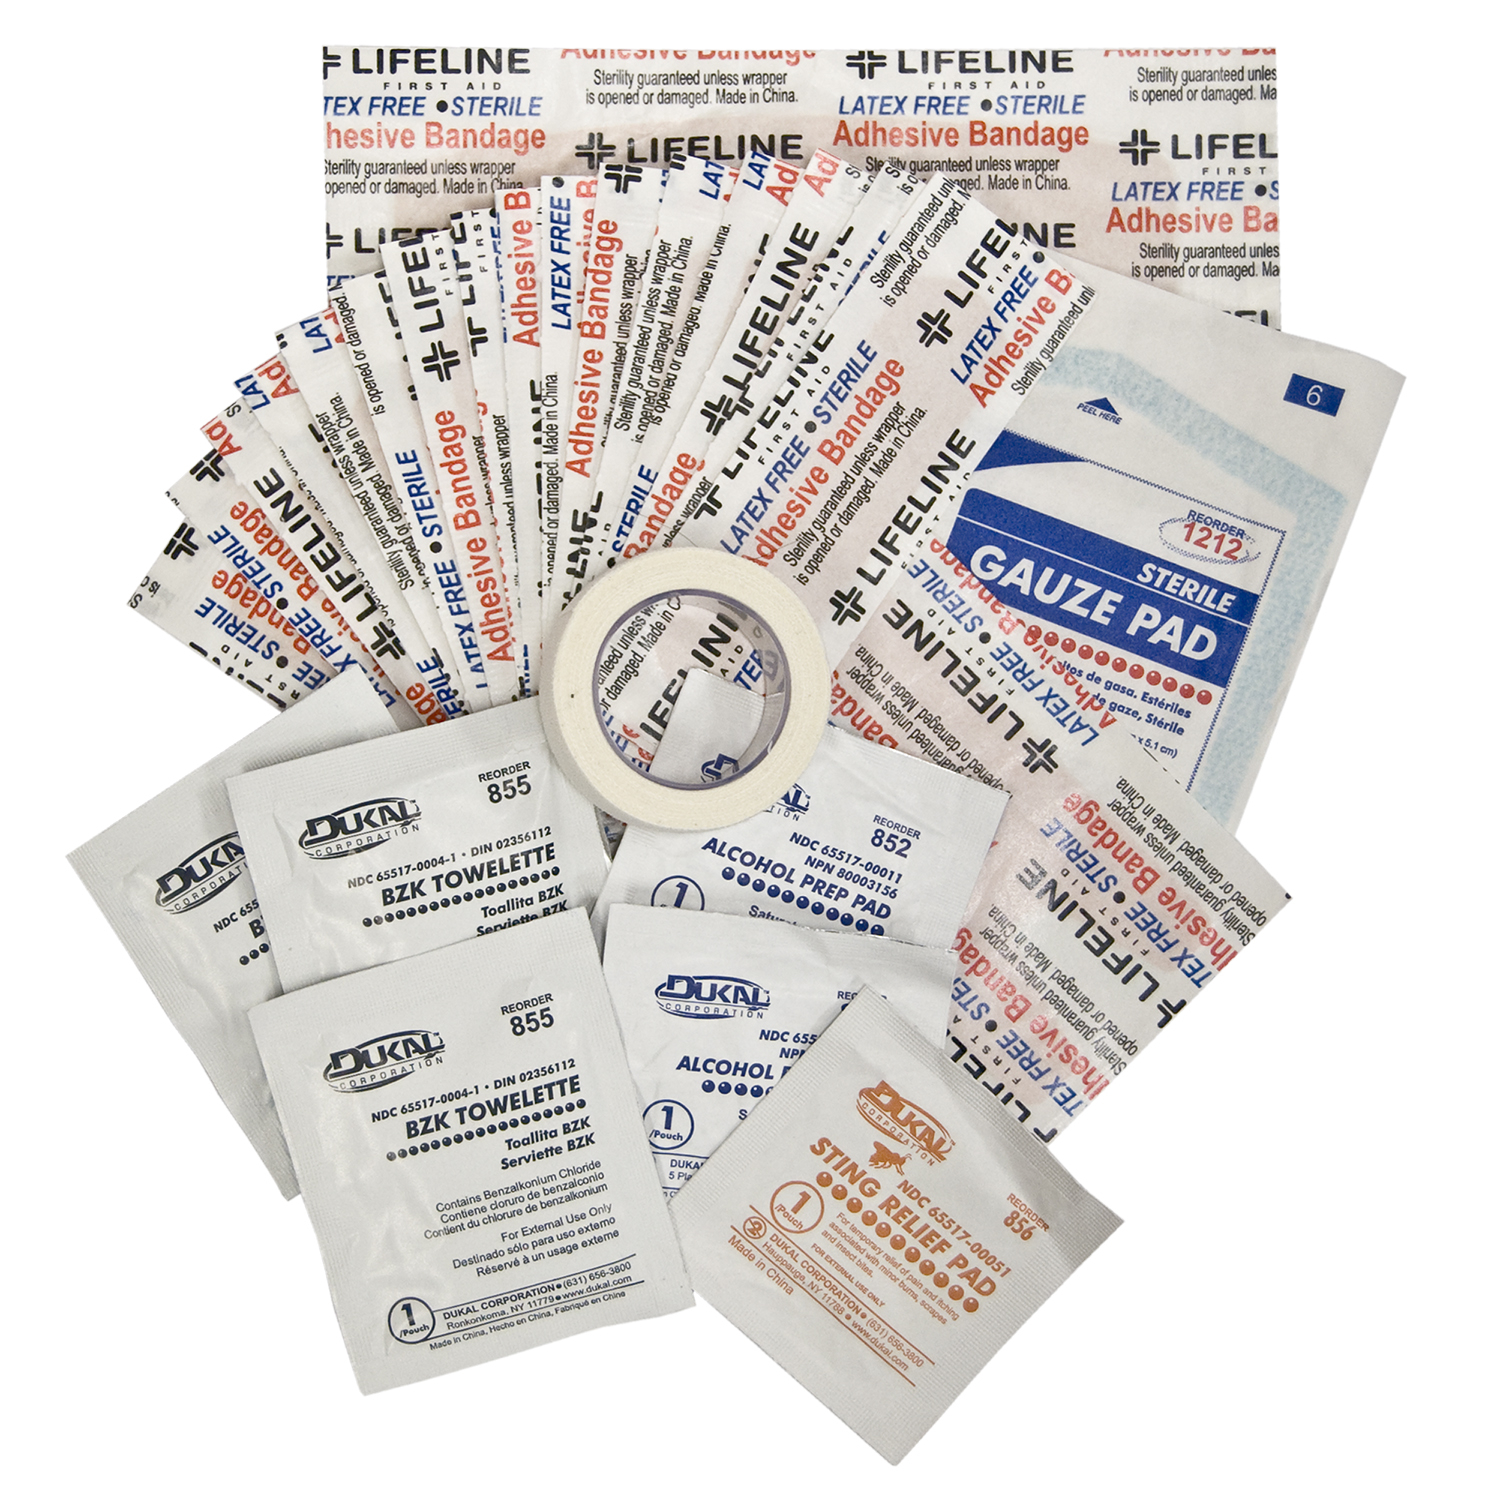 Lifeline Weather Resistant First Aid Kit 28 Pieces - image 1 of 1